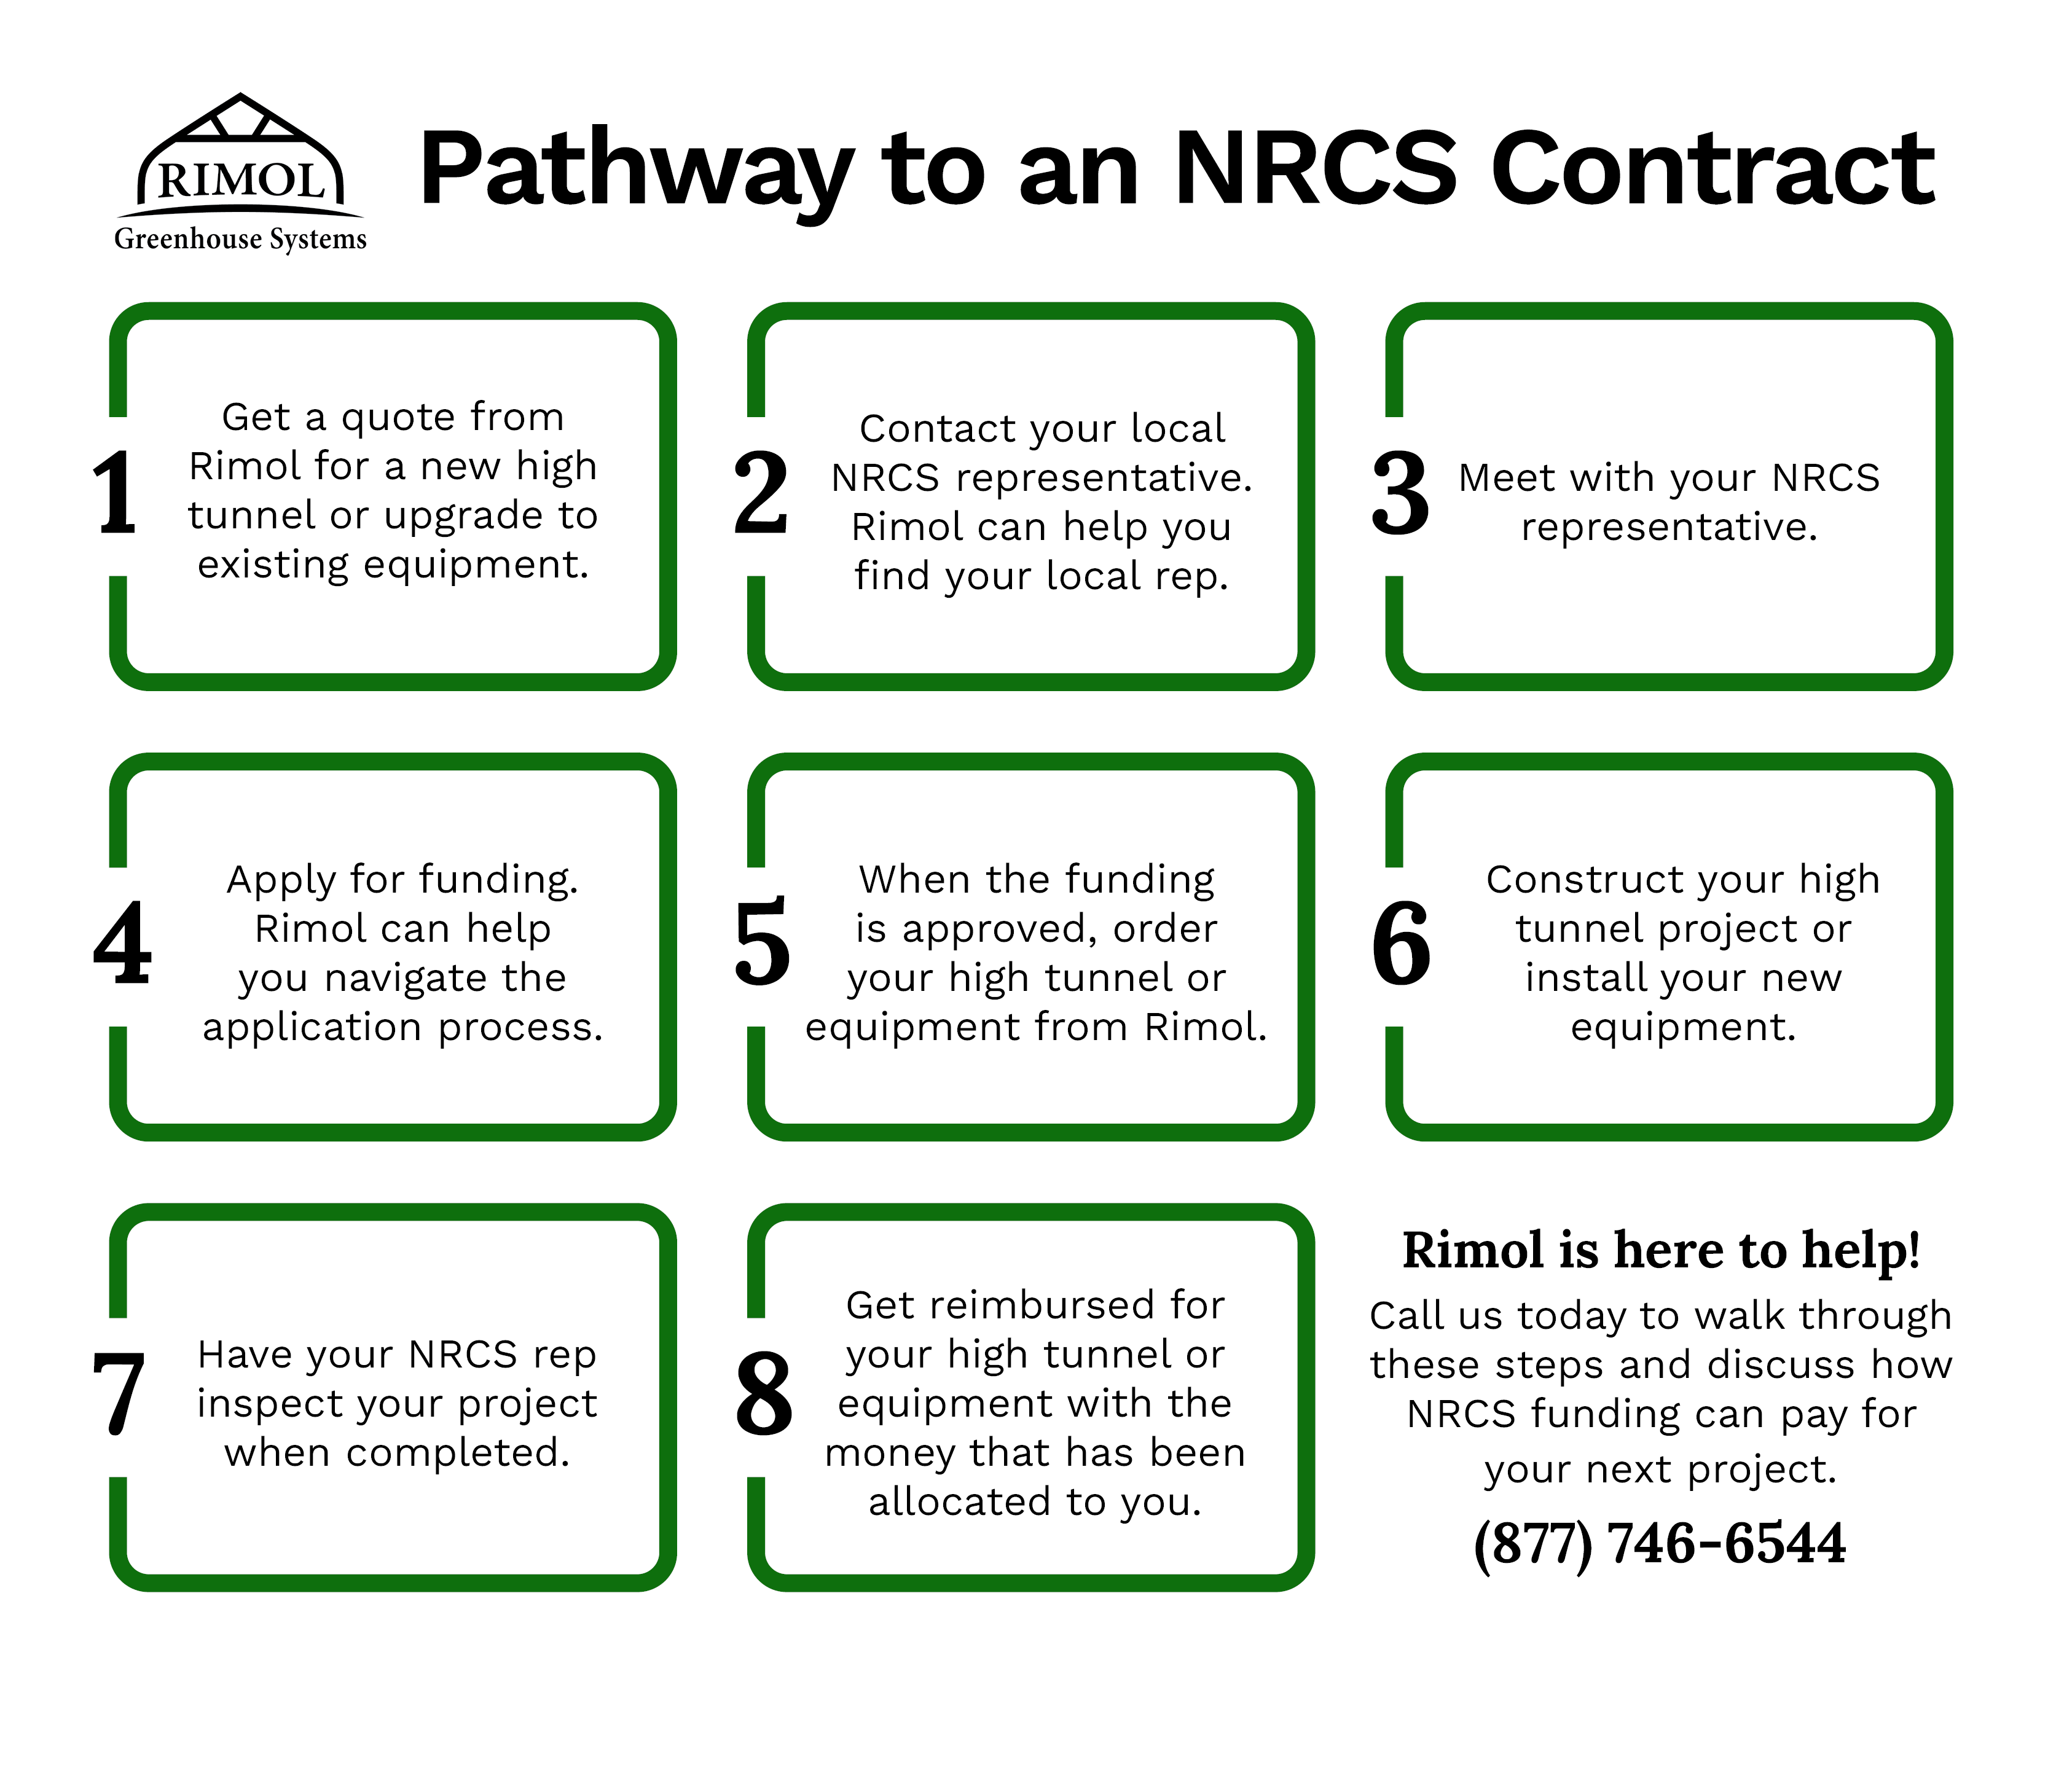 Pathway to an NRCS Contract